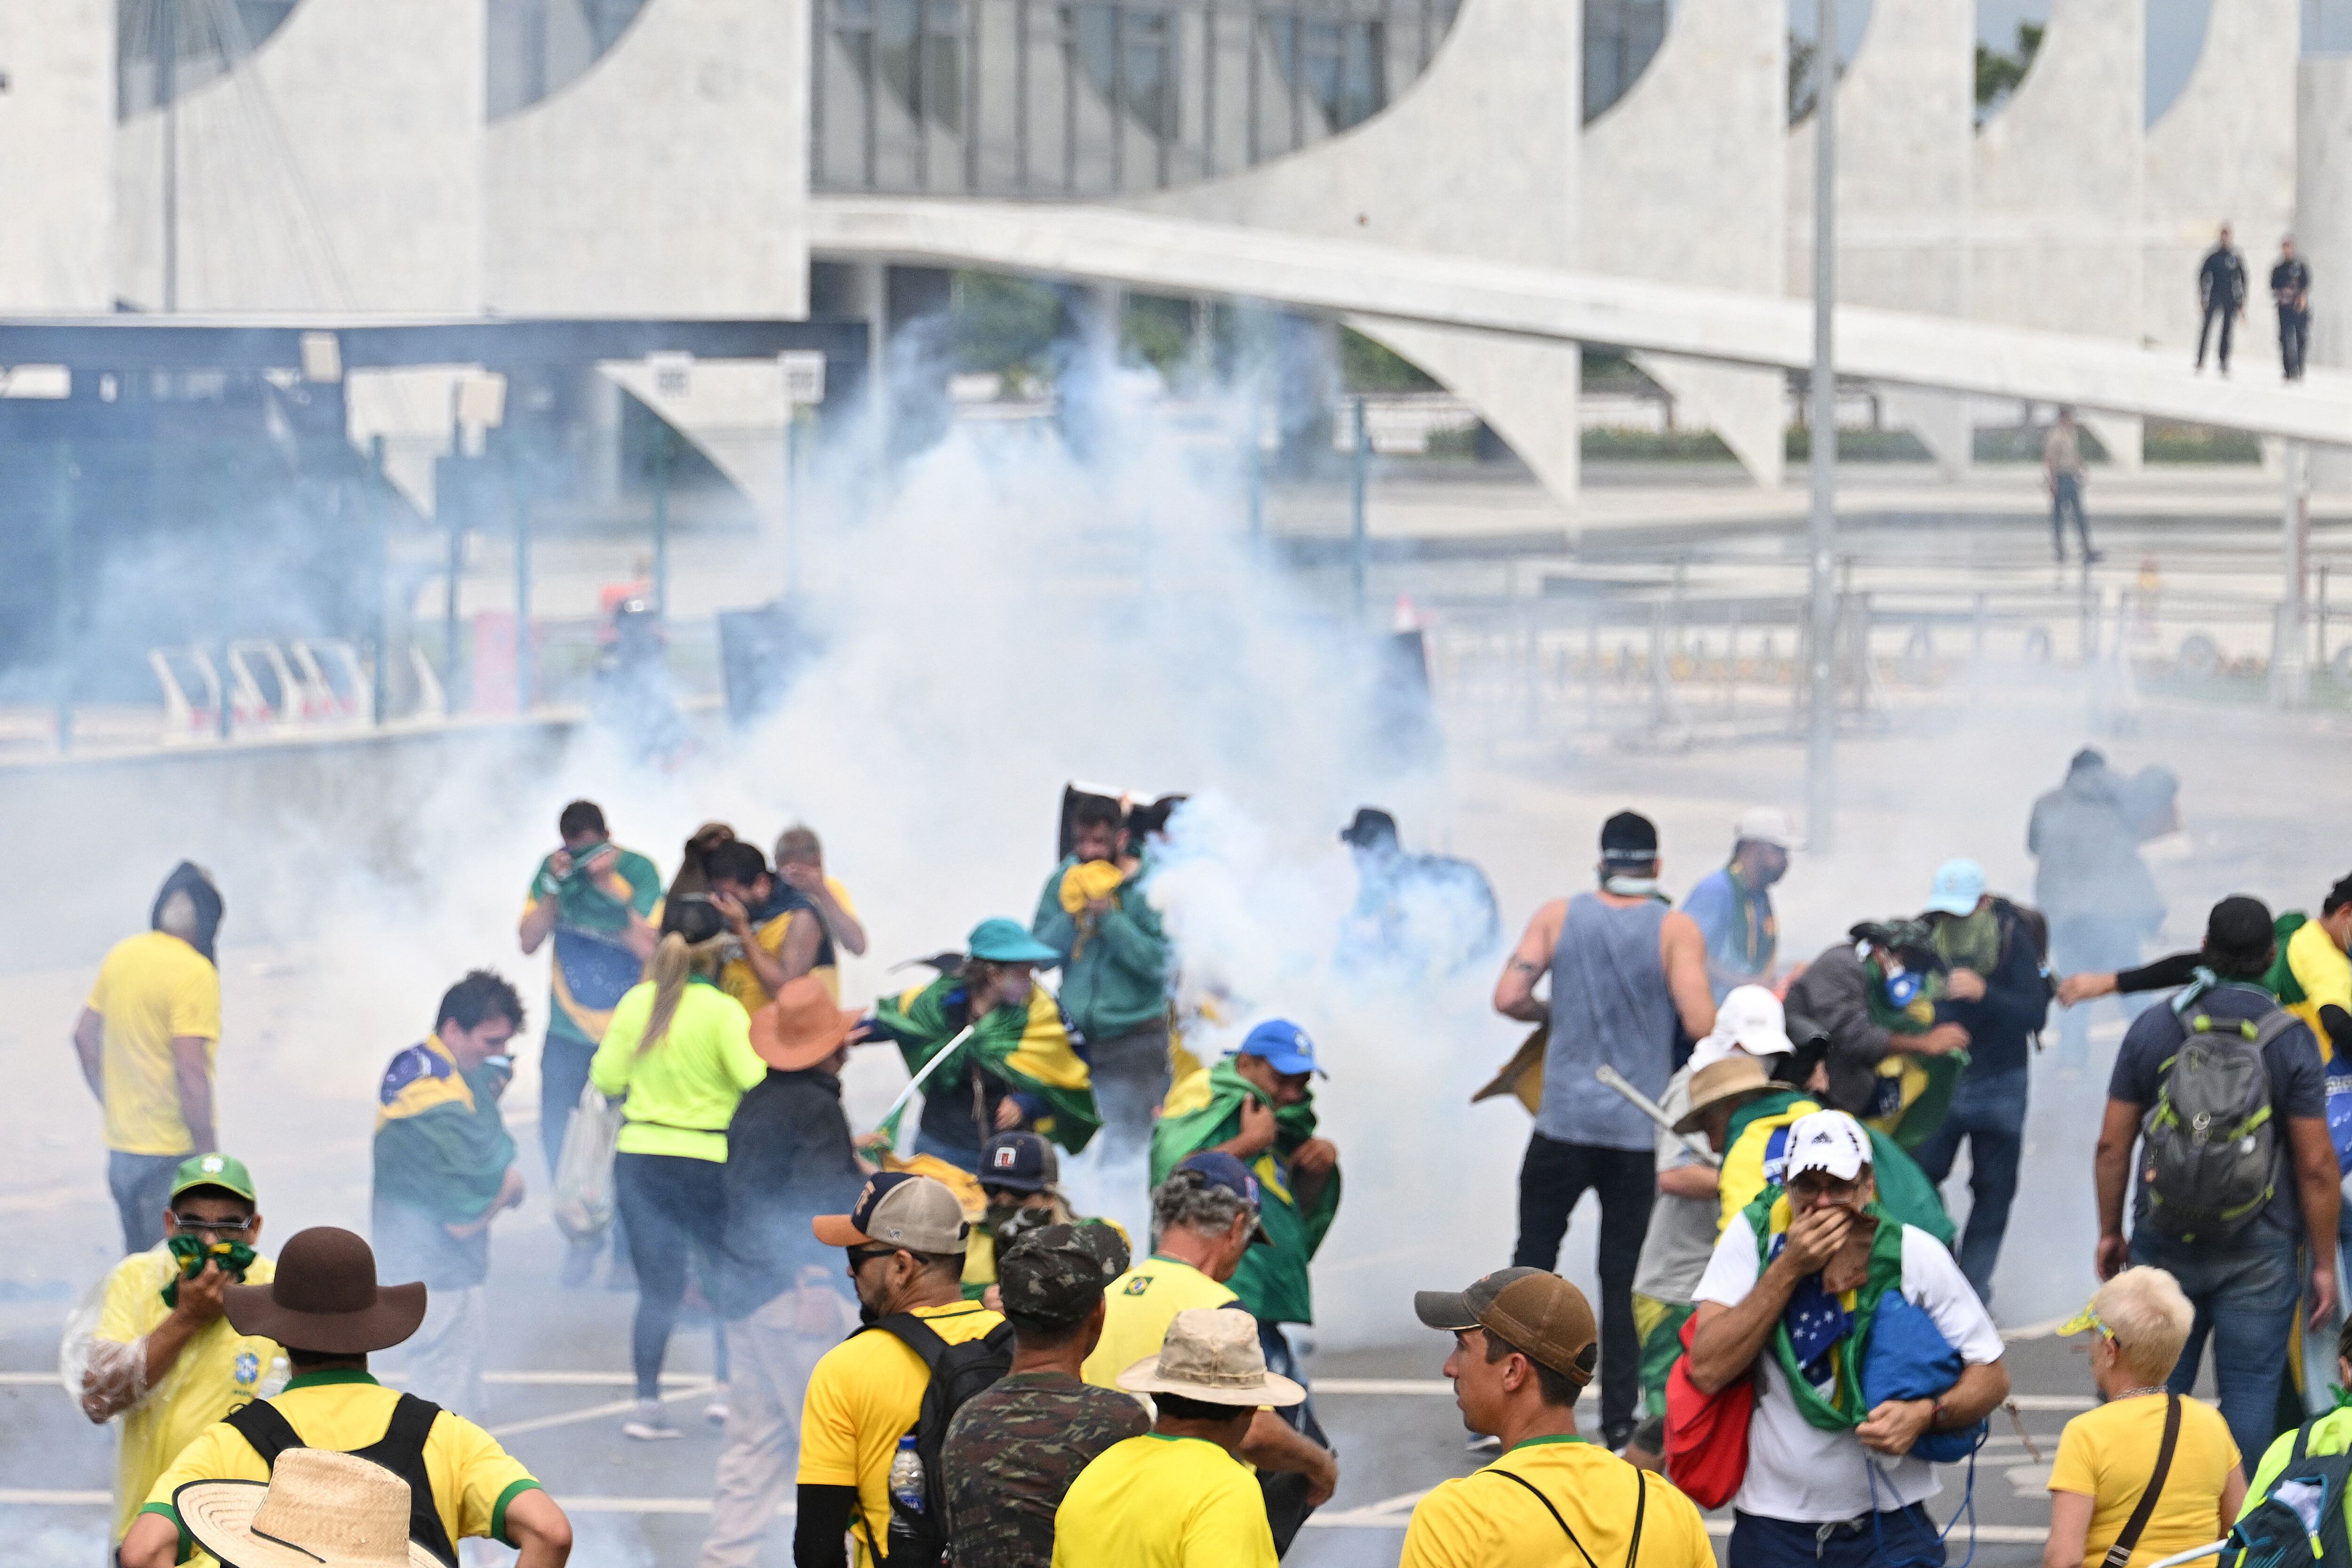 Supporters of former Brazilian President Jair Bolsonaro clash with police during a demonstration in front of the Planalto Palace in Brasilia on January 8, 2023.